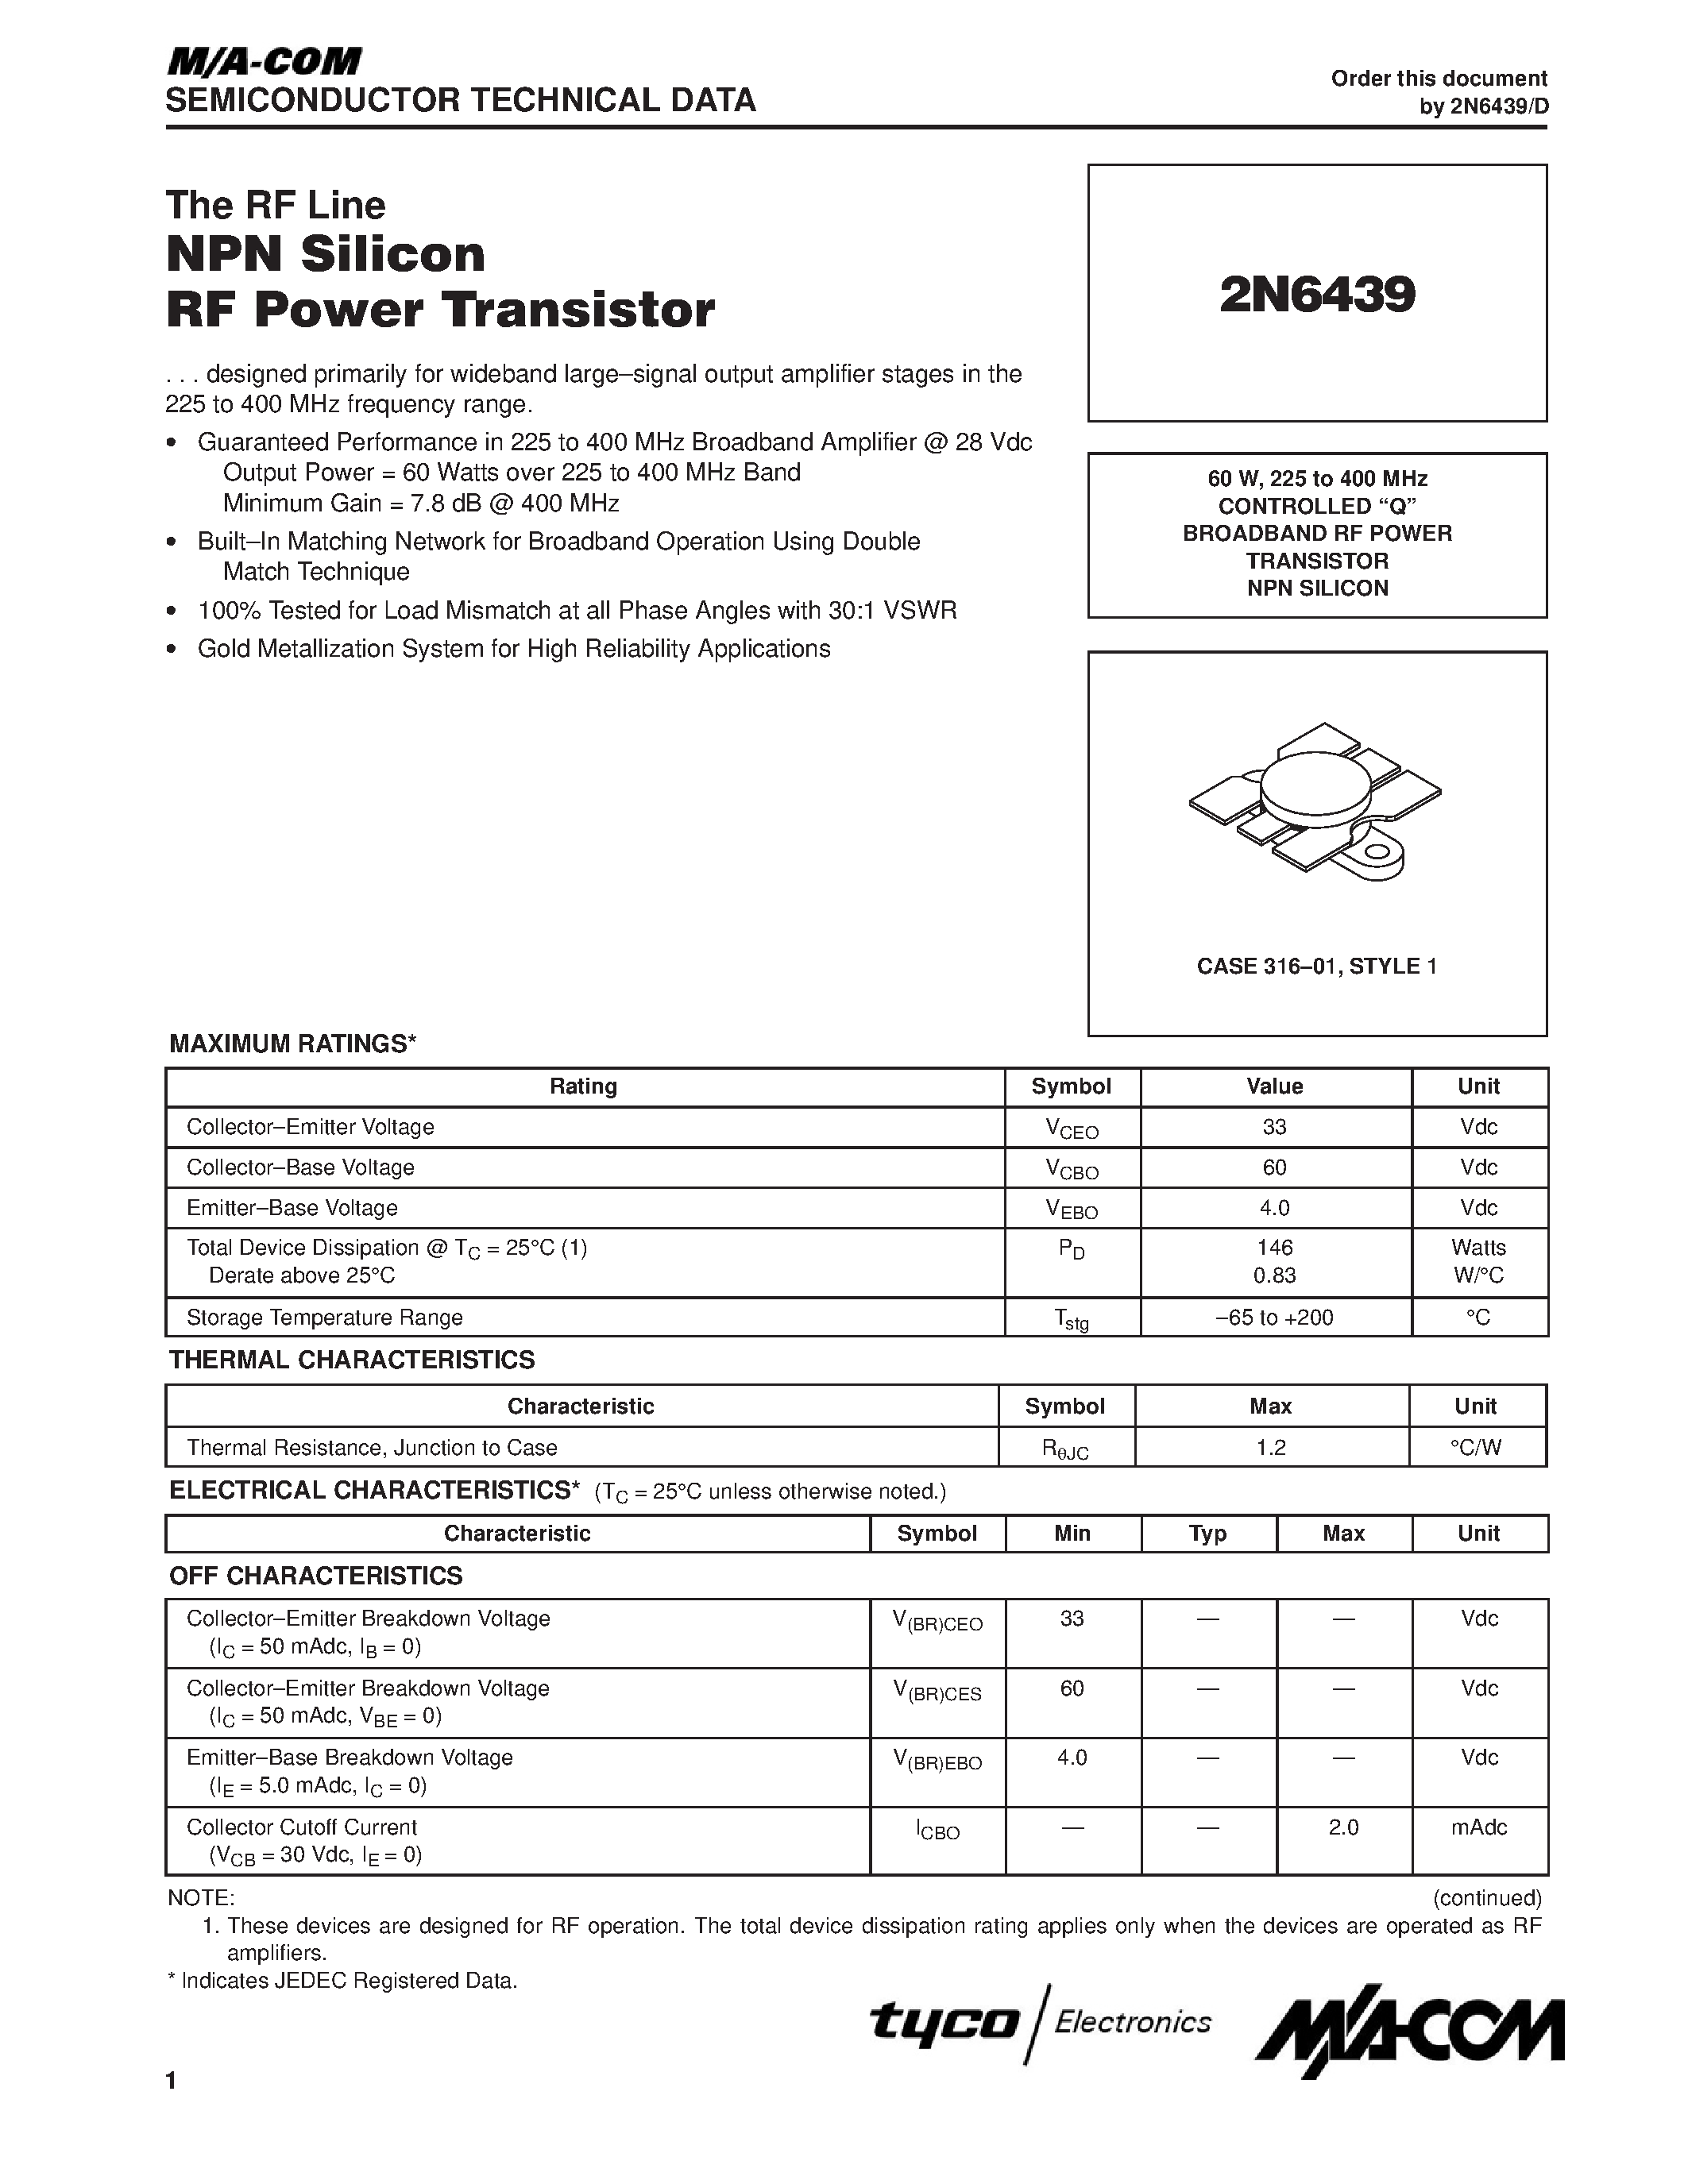 Datasheet M306N0MCT - 60 W / 225 to 400 MHz CONTROLLED Q BROADBAND RF POWER TRANSISTOR NPN SILICON page 1